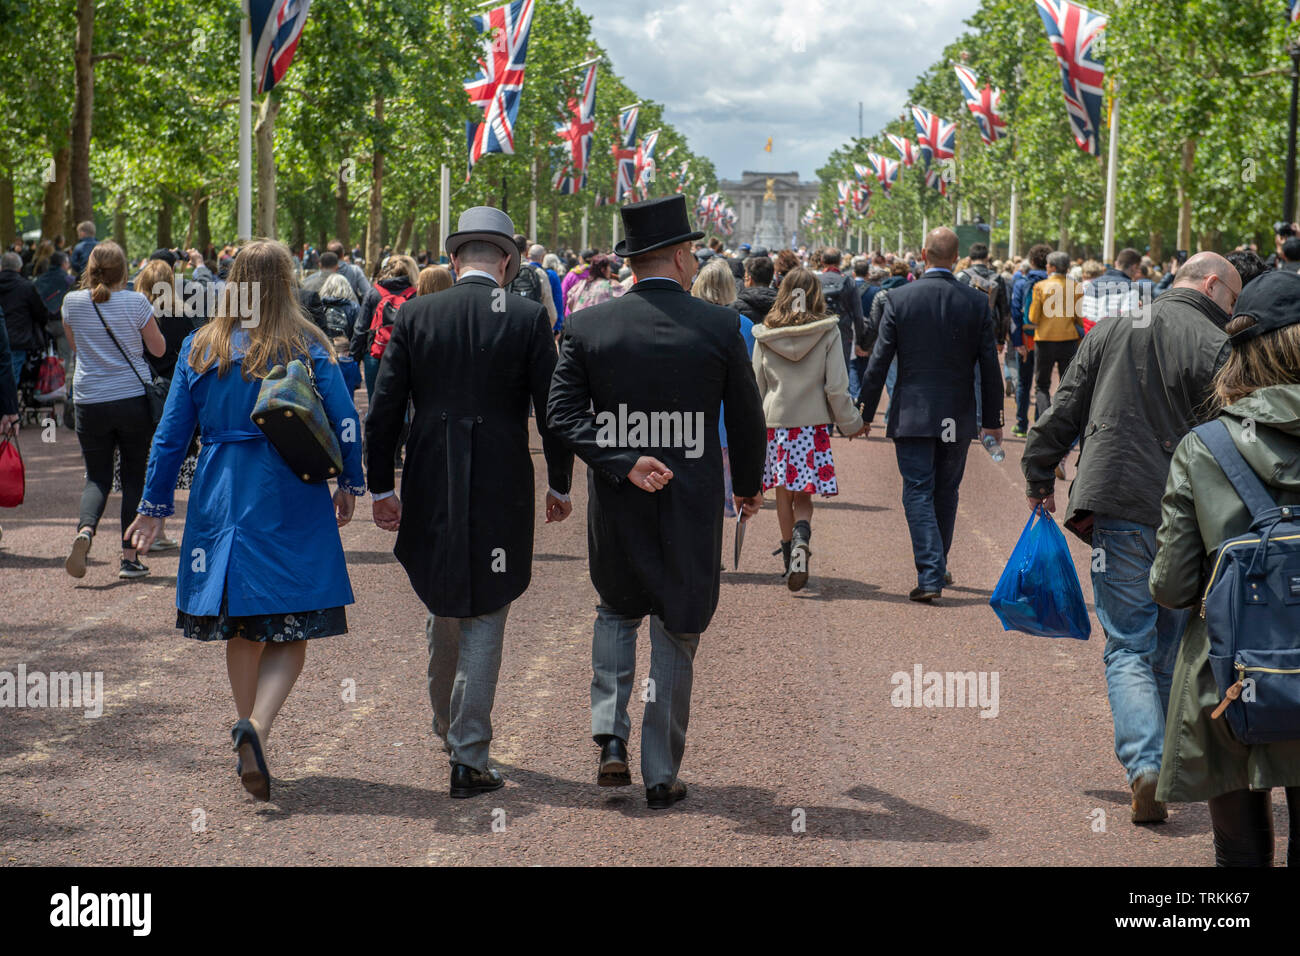 The Mall, London, UK. 8th June 2019. Guests leaving Horse Guards Parade after Trooping the Colour walk to Buckingham Palace along The Mall to watch the traditional RAF fly-past and catch a glimpse of the Royal Family on the palace balcony. Credit: Malcolm Park/Alamy Live News. Stock Photo